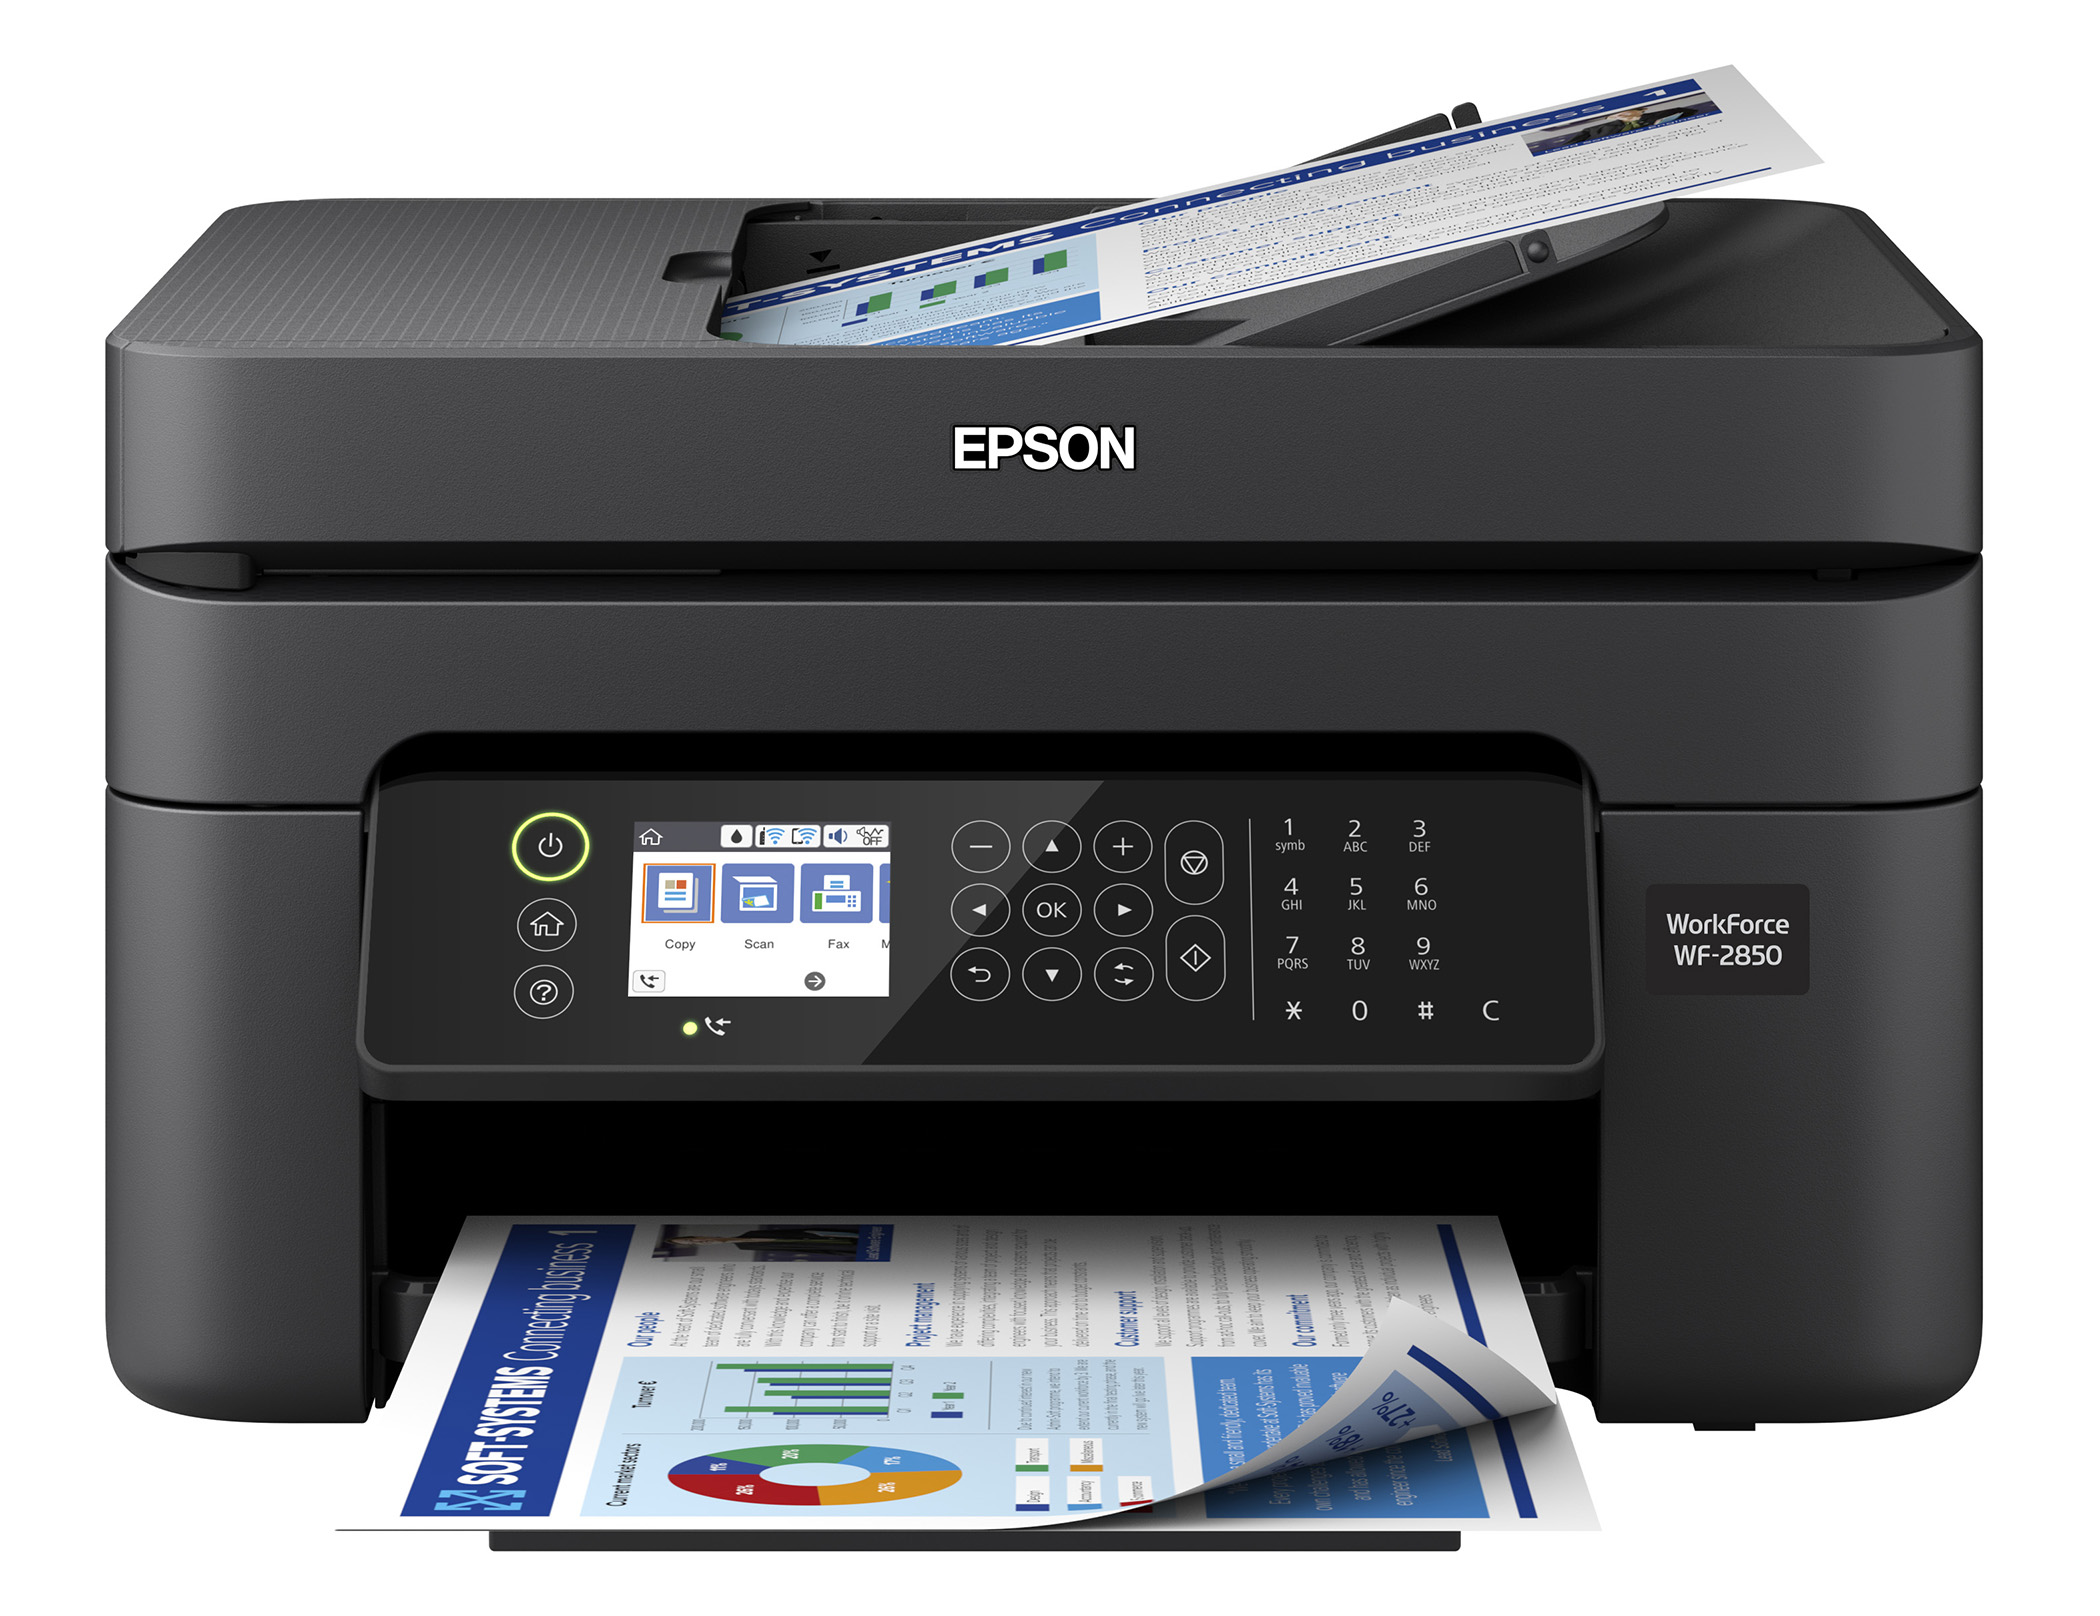 Epson WorkForce WF-2850 All-in-One Wireless Color Printer with Scanner, Copier and Fax - image 1 of 7